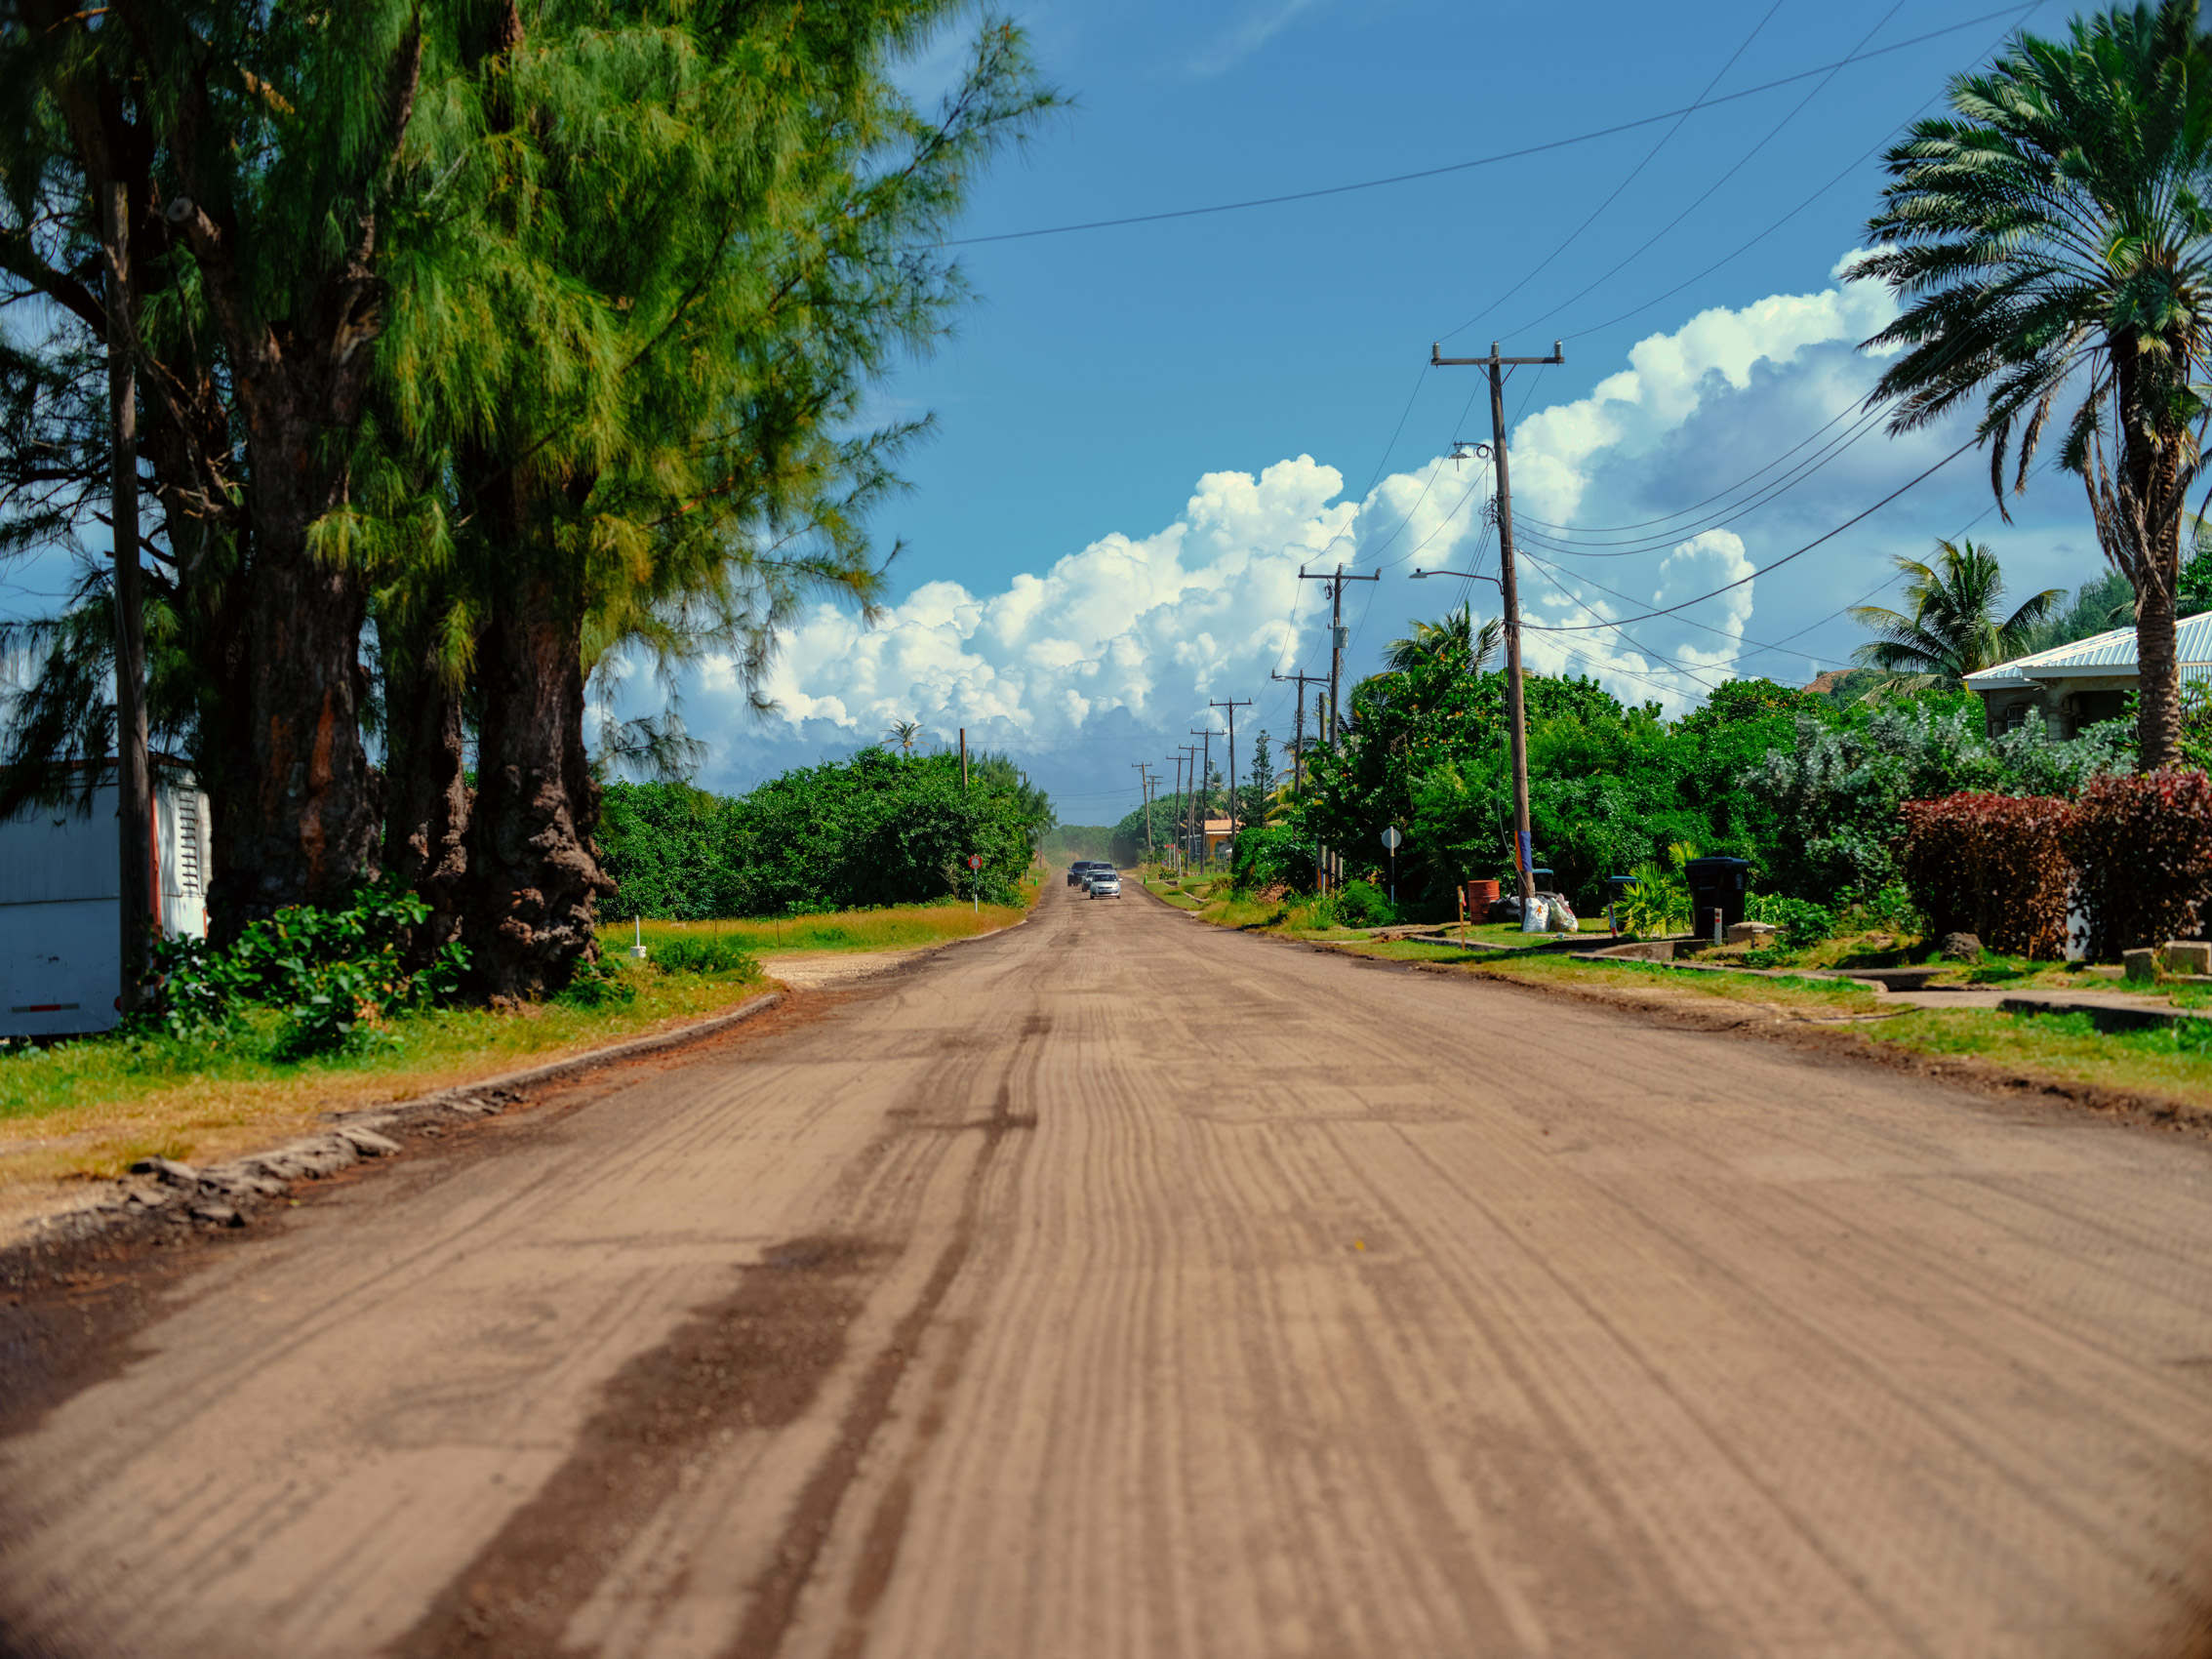 A-BEAUTIFUL-VANISHING-POINT-OF-VIEW-OF-A-ROAD-TO-bathsheba-IN-BARBADOS